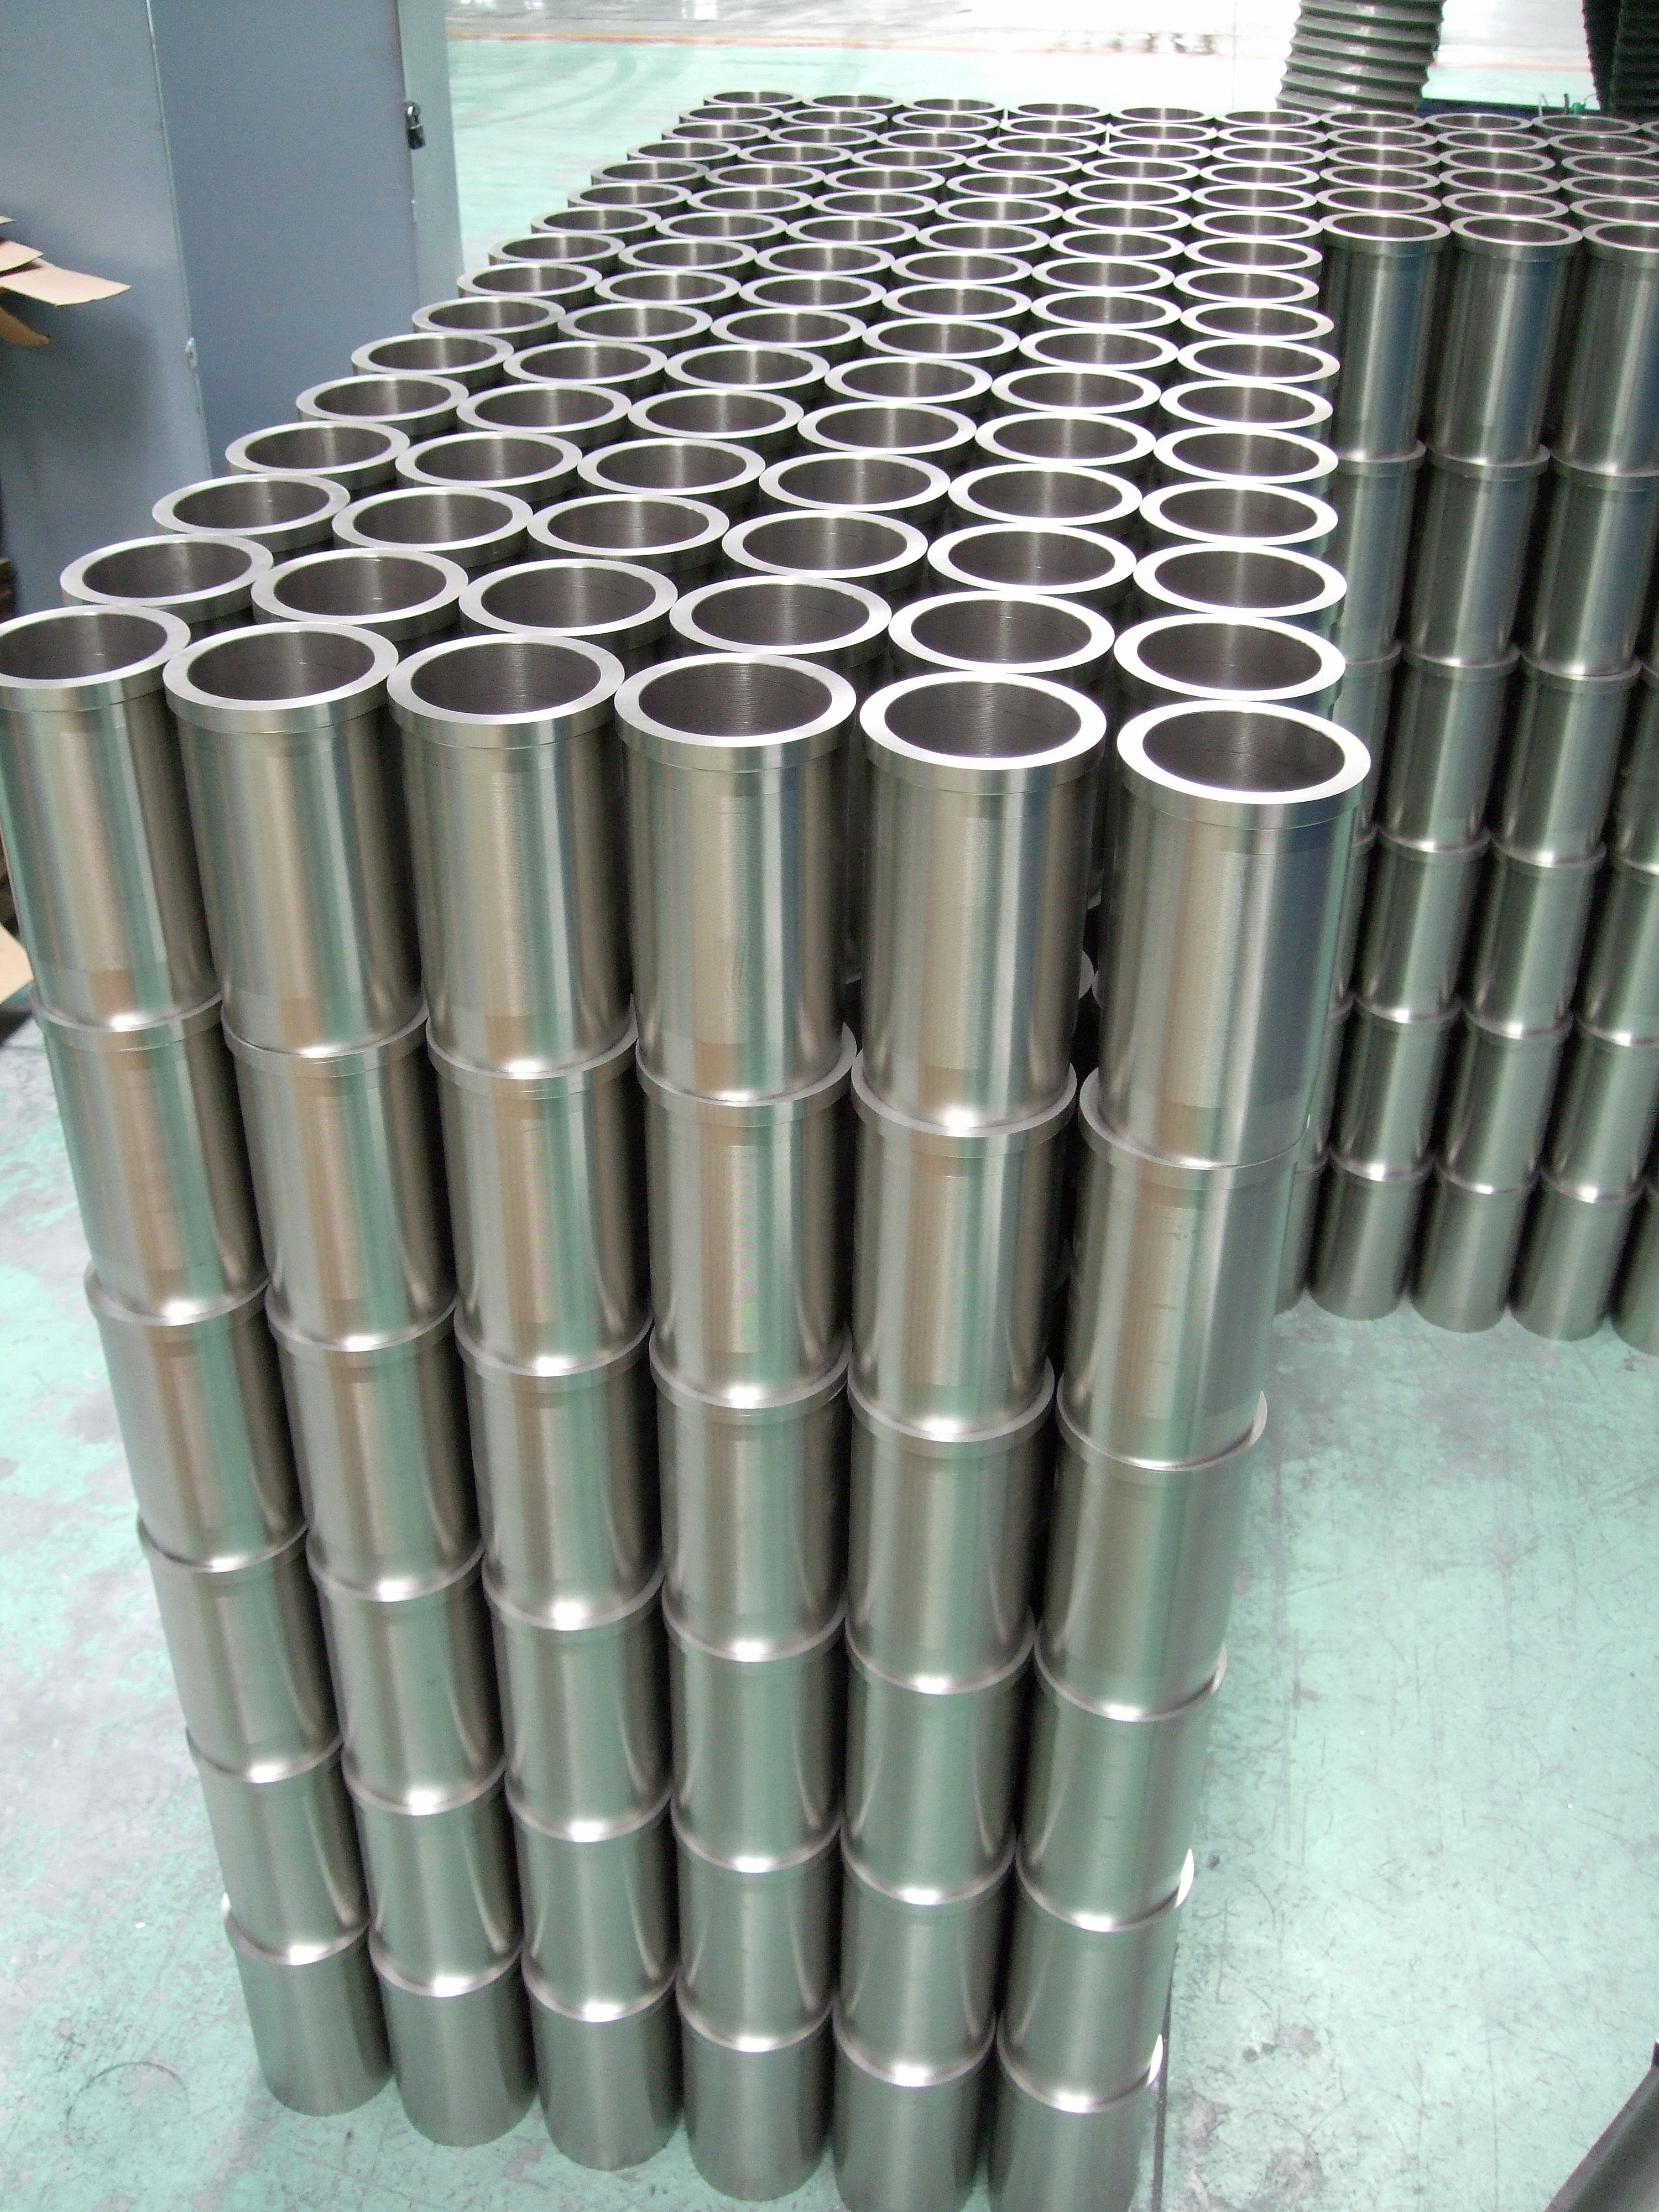 JSC MMP started the lines for production of cylinder liners